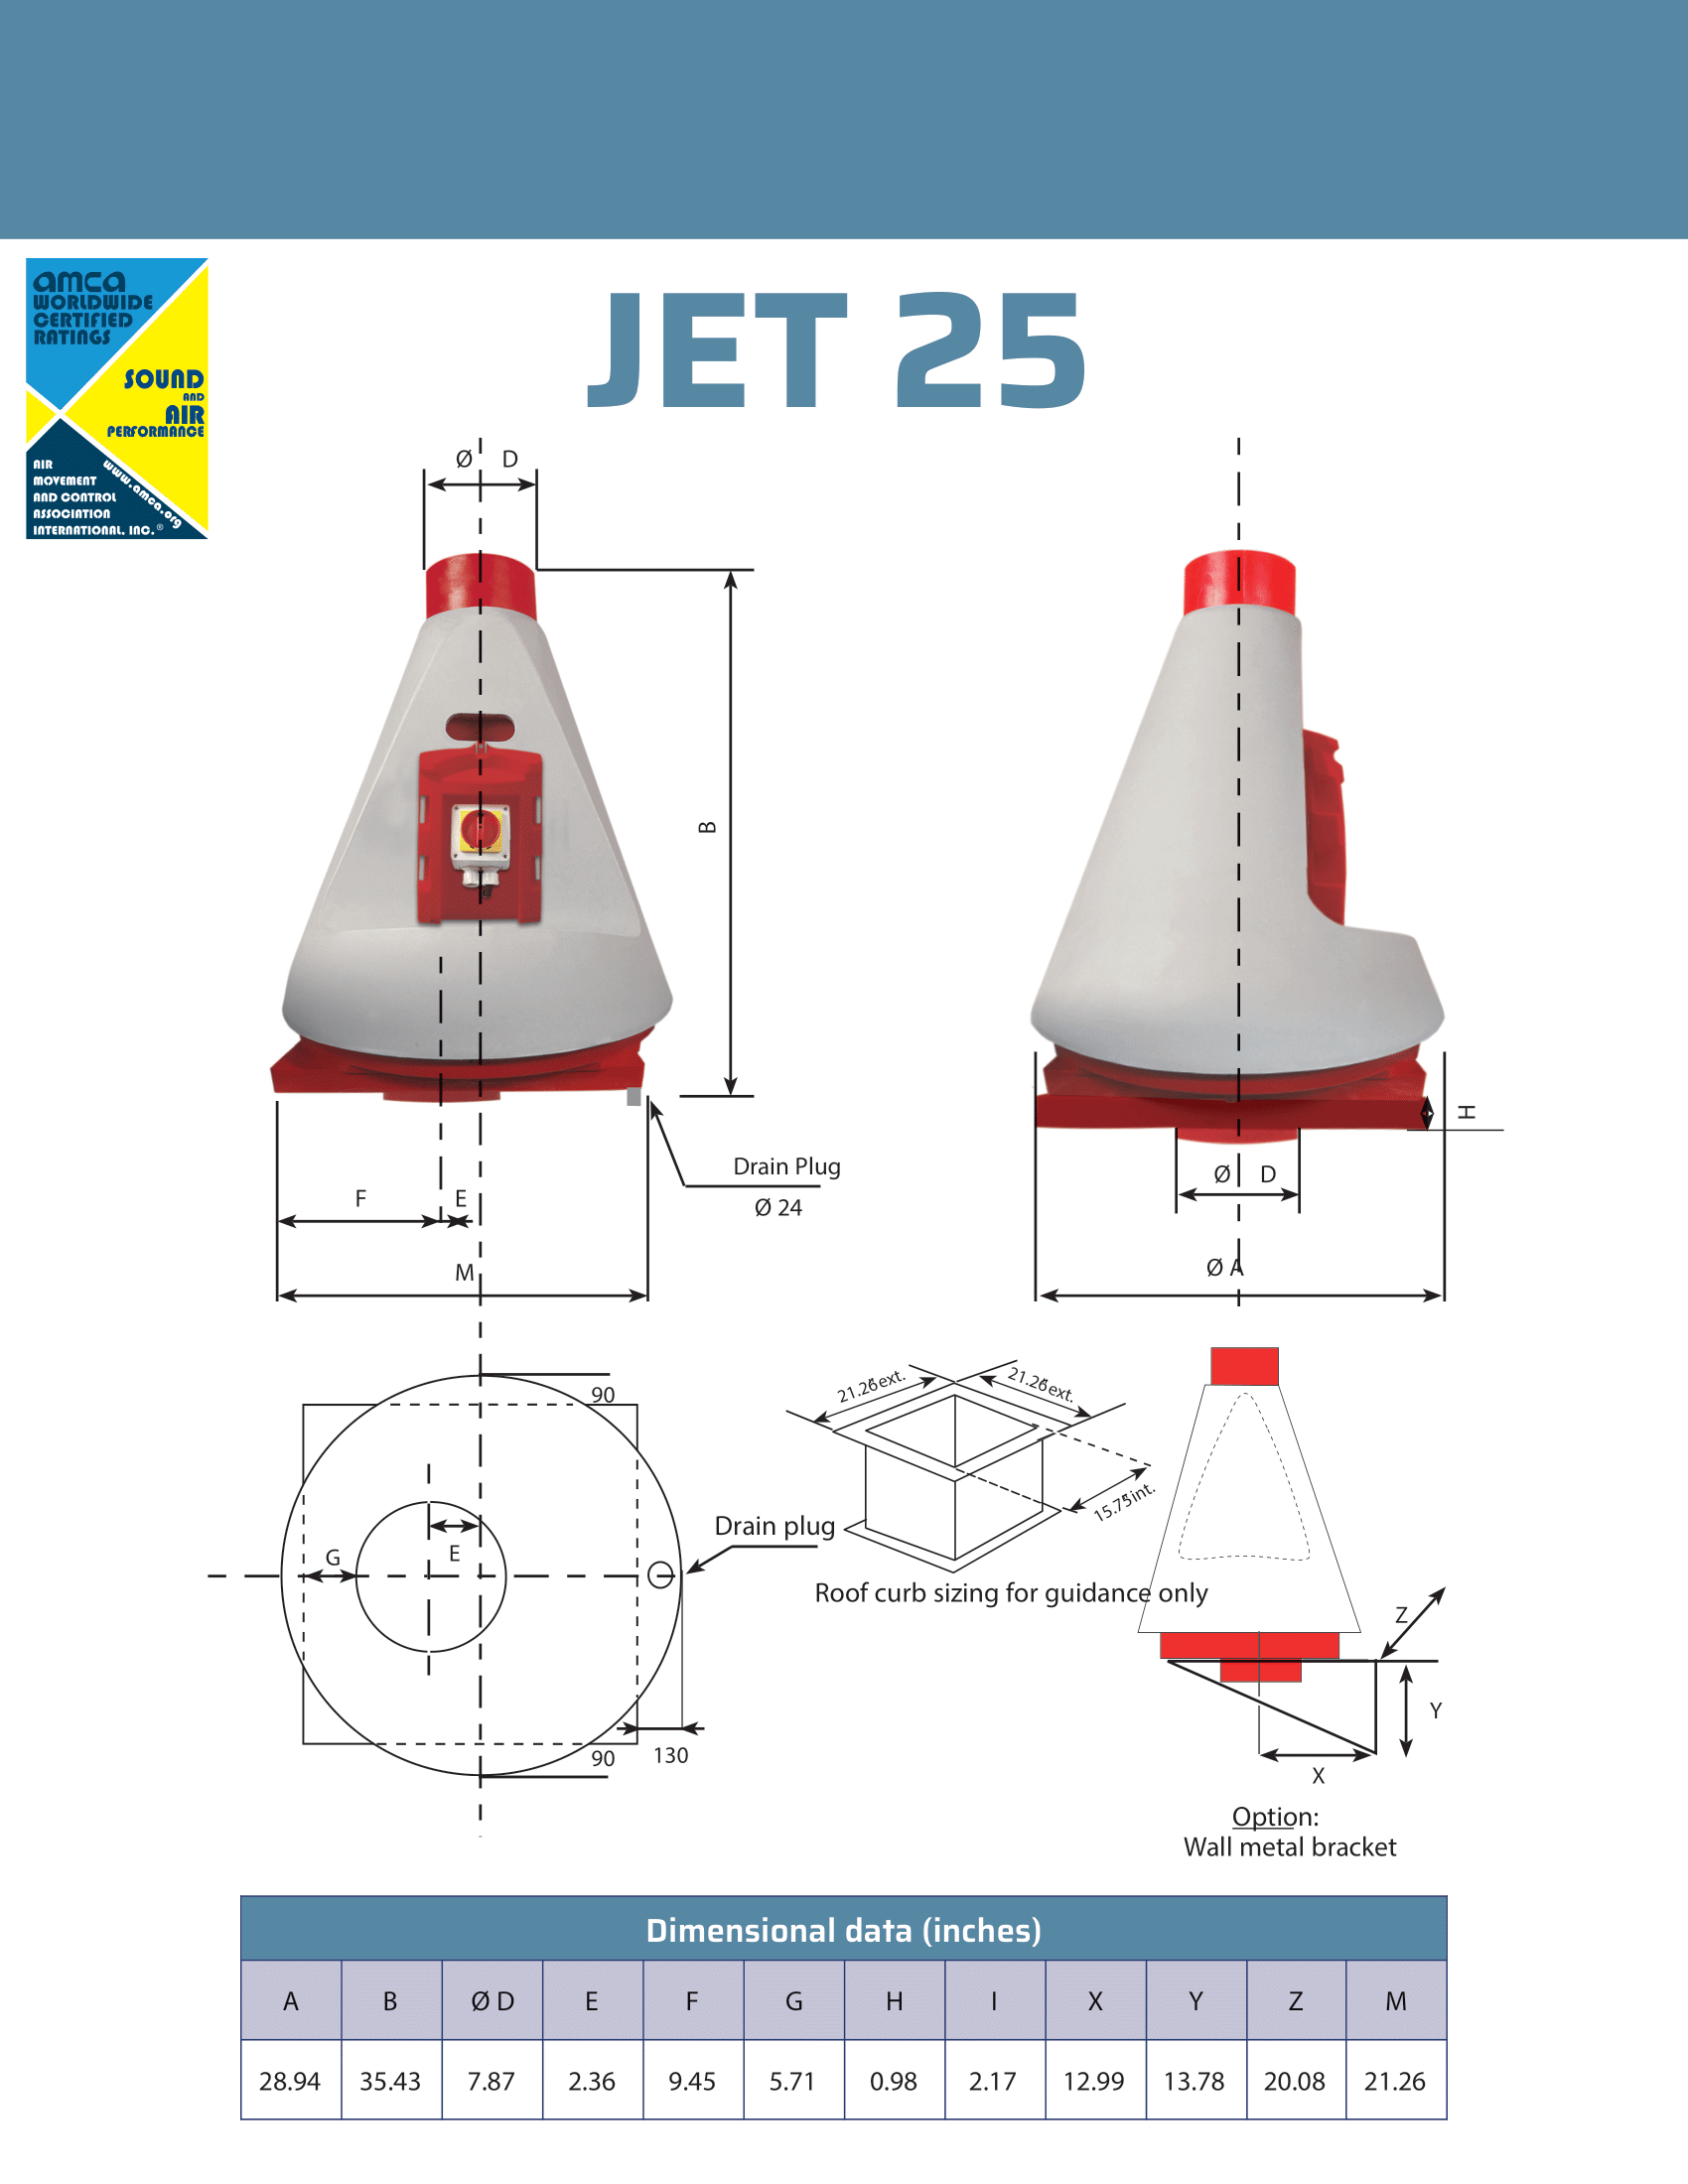 Diagram and dimensions spec sheet for Plastec Jet 25 Inline Polypropylene Blower showing external dimensions and mounting brackets ACMA certified